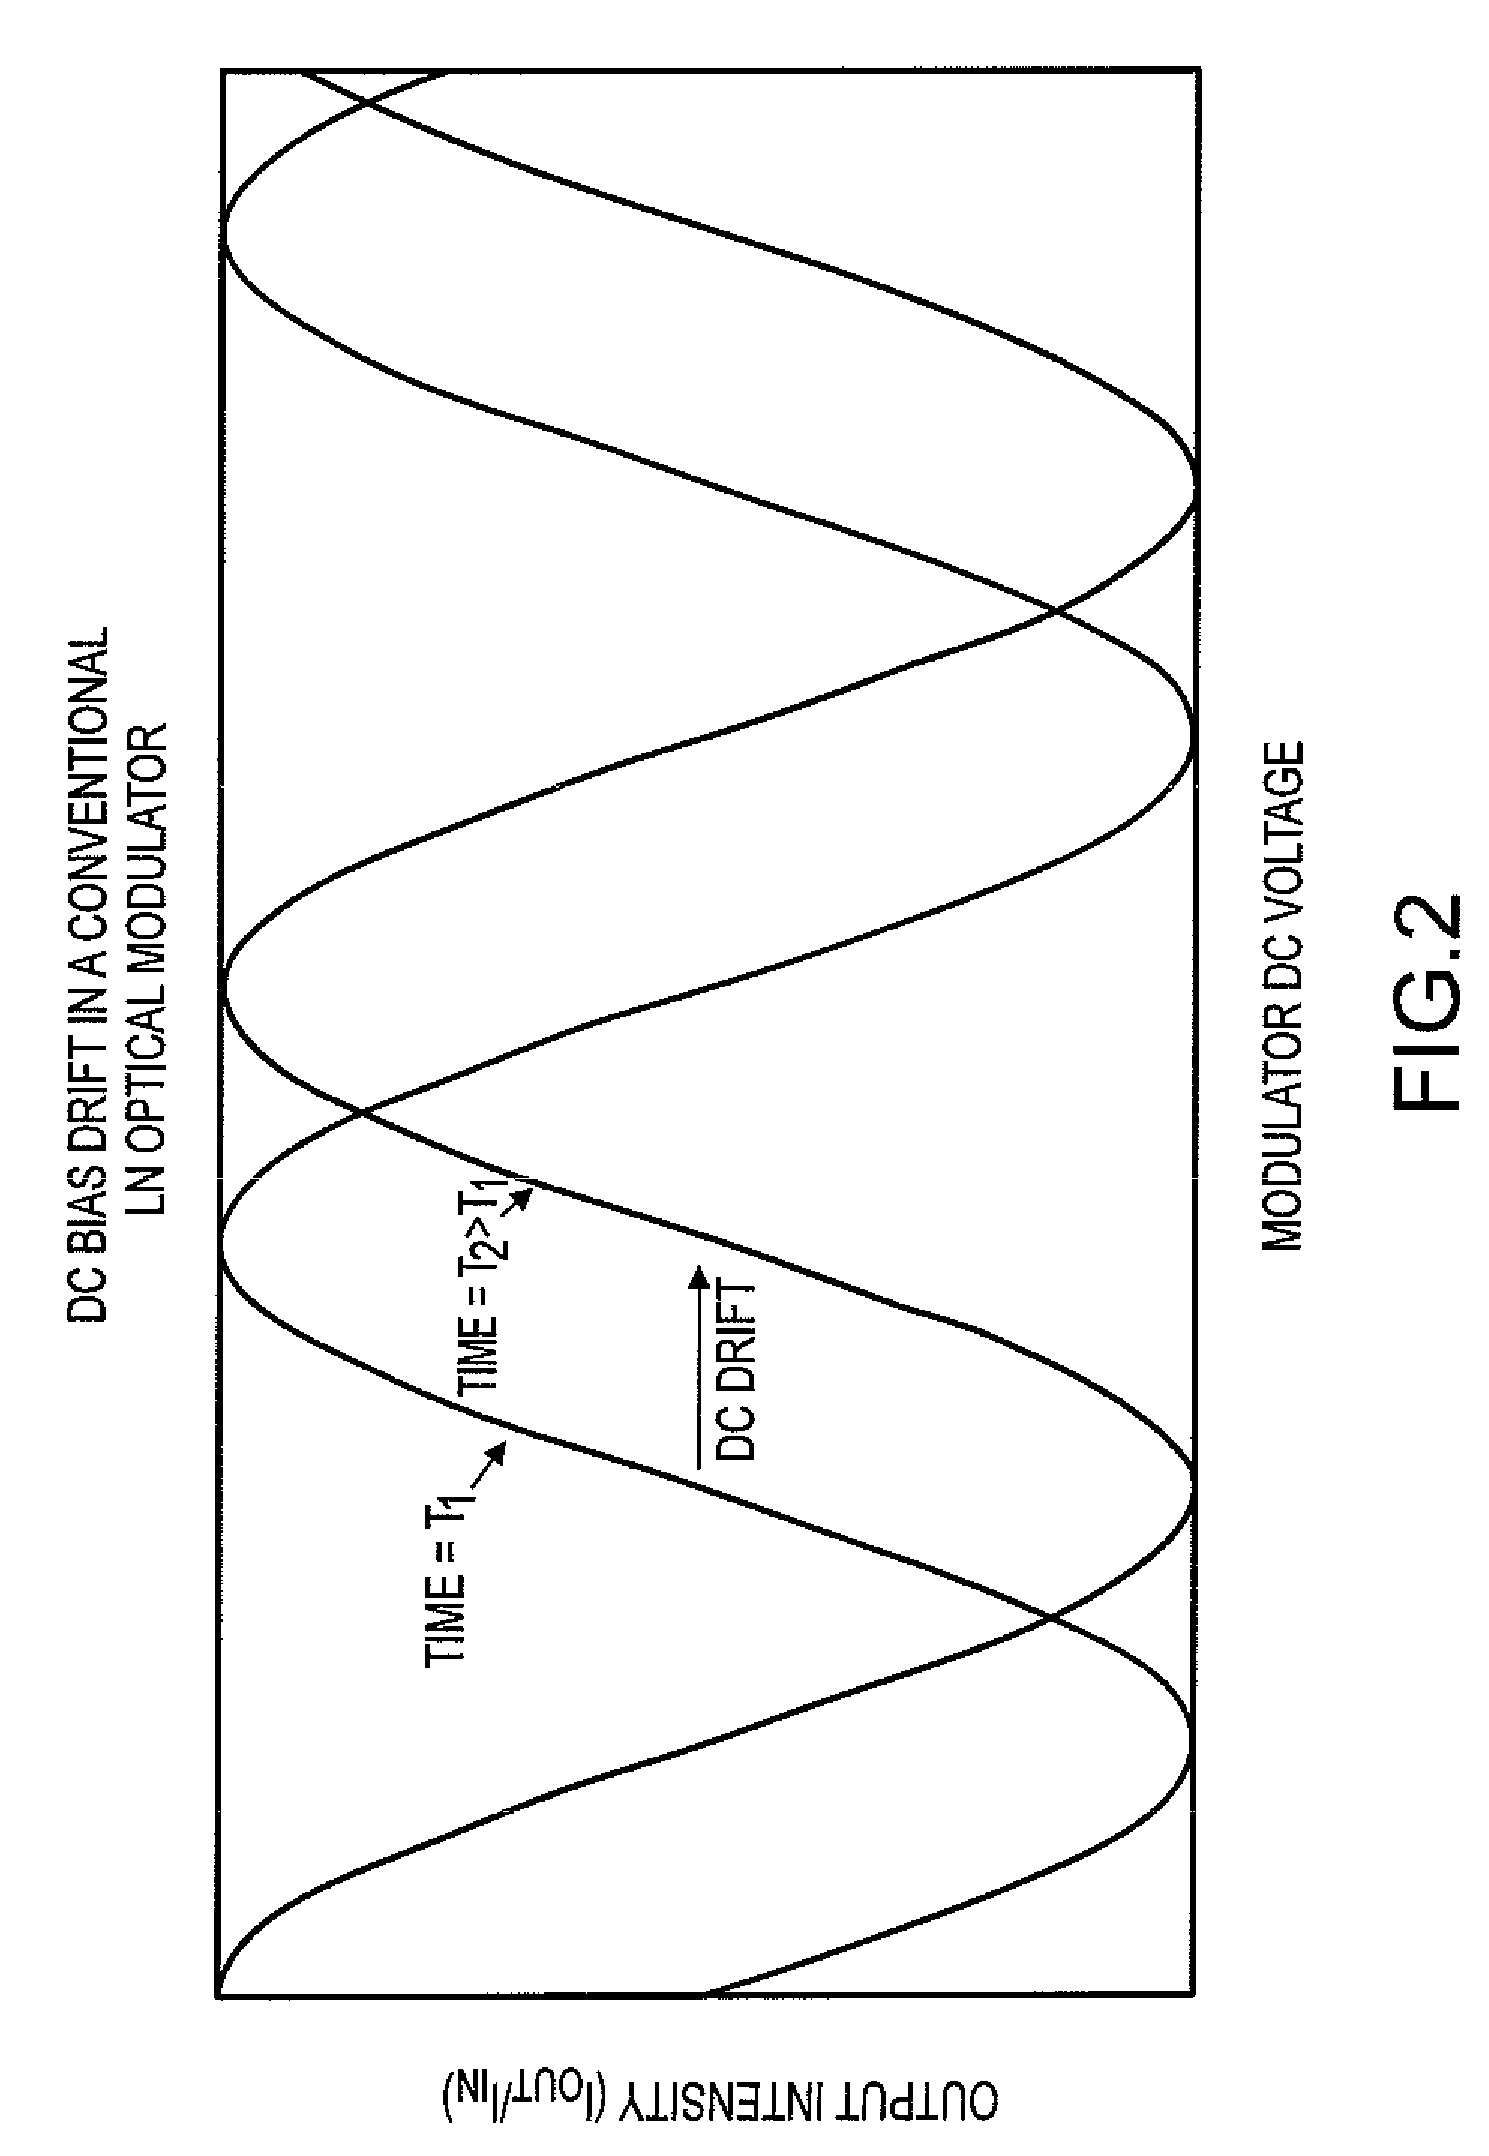 Lithium niobate modulator having a doped semiconductor structure for the mitigation of DC bias drift